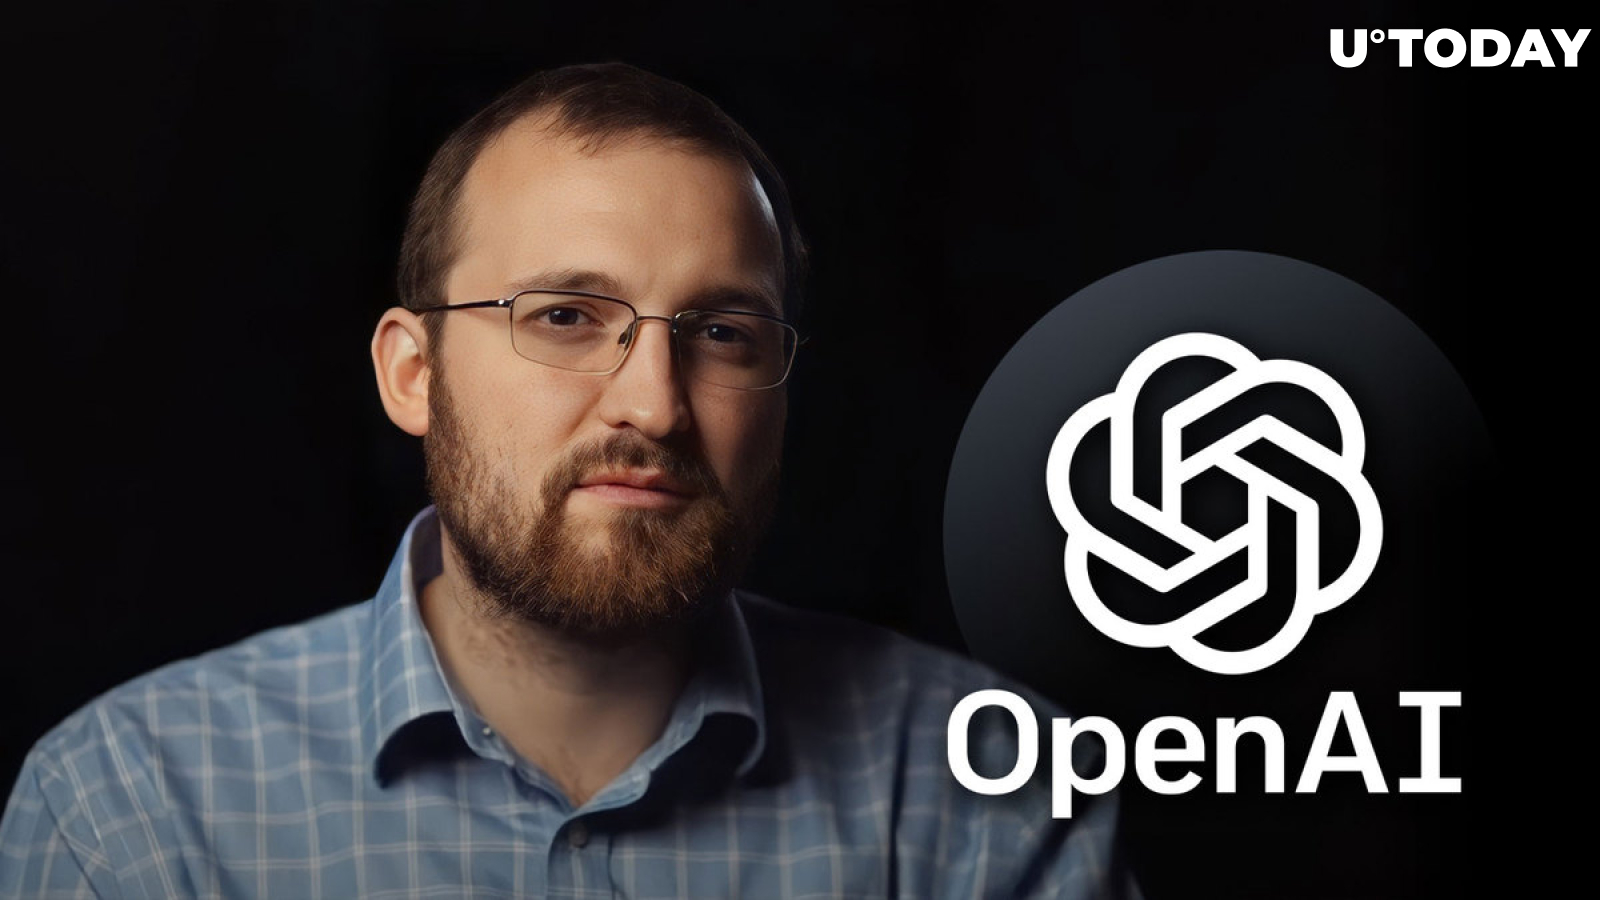 Cardano Founder Comments on Unexpected New Turn in OpenAI Drama With Microsoft